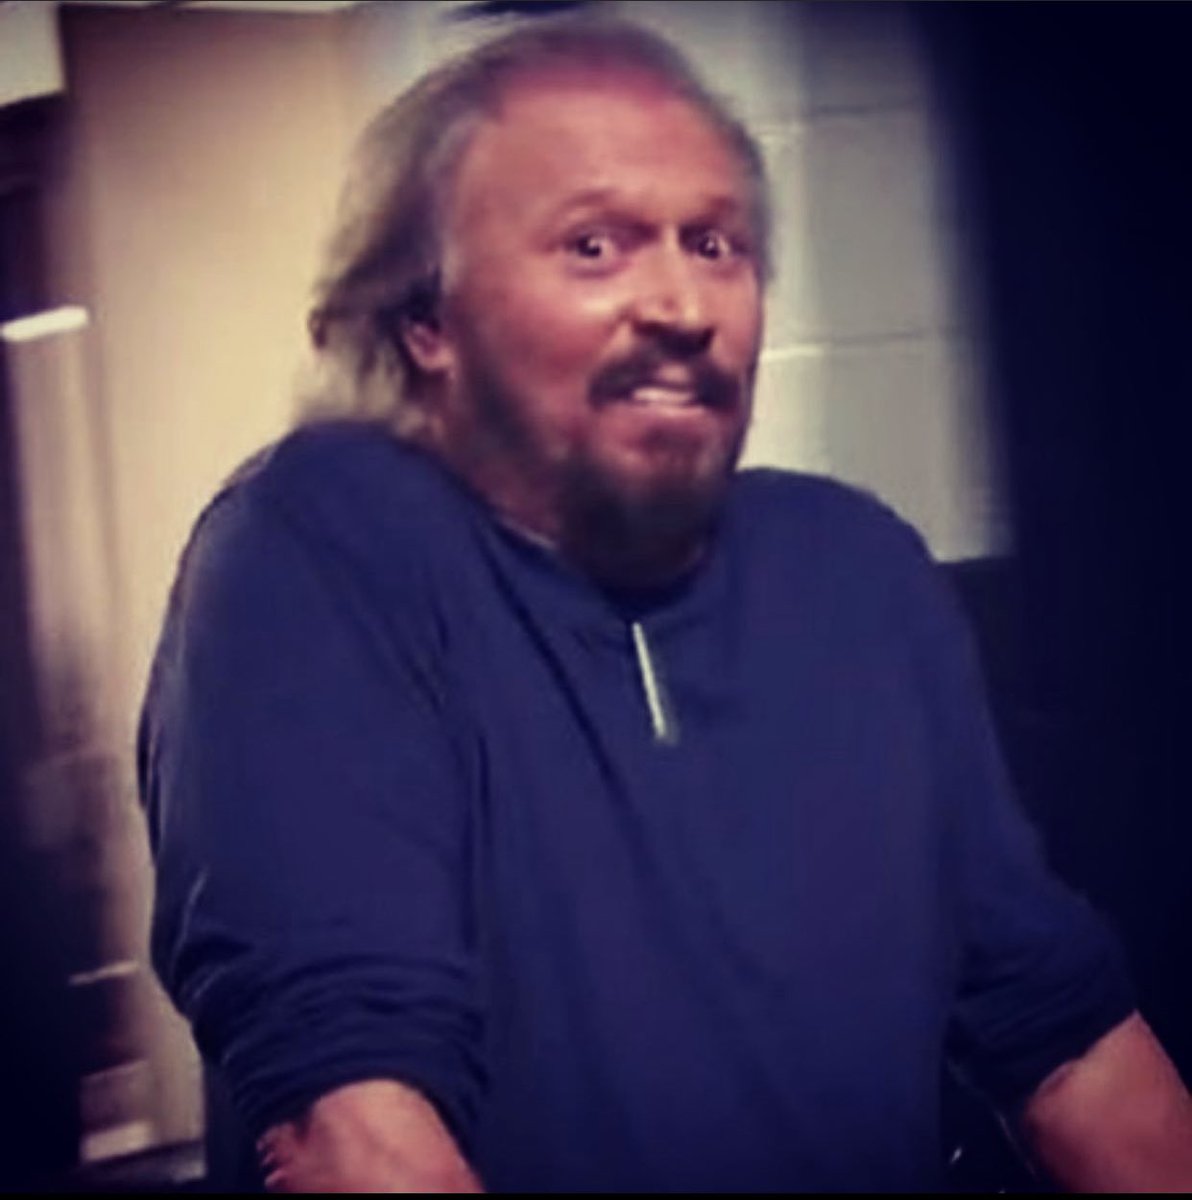 Barry Gibb Overwhelmed And Overjoyed I Love All Of You I Wish I Could Respond To Each Of You Personally Thank You For Caring Bg T Co Lpzoioe47l